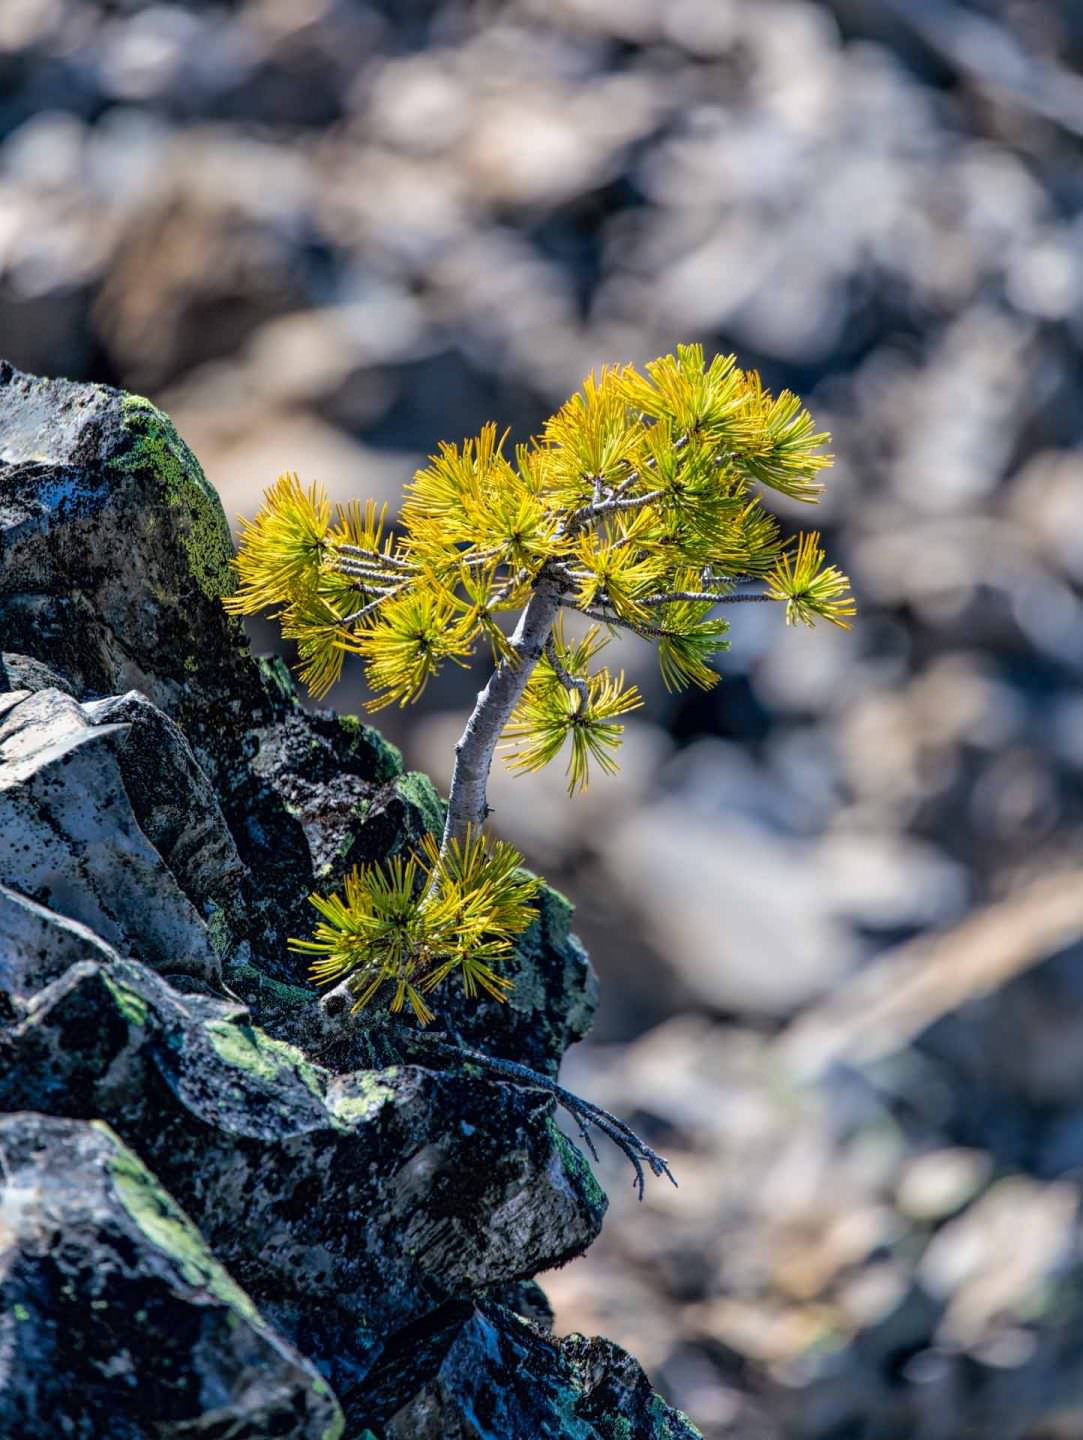 A tiny pine tree clings to rocks in a lava field
